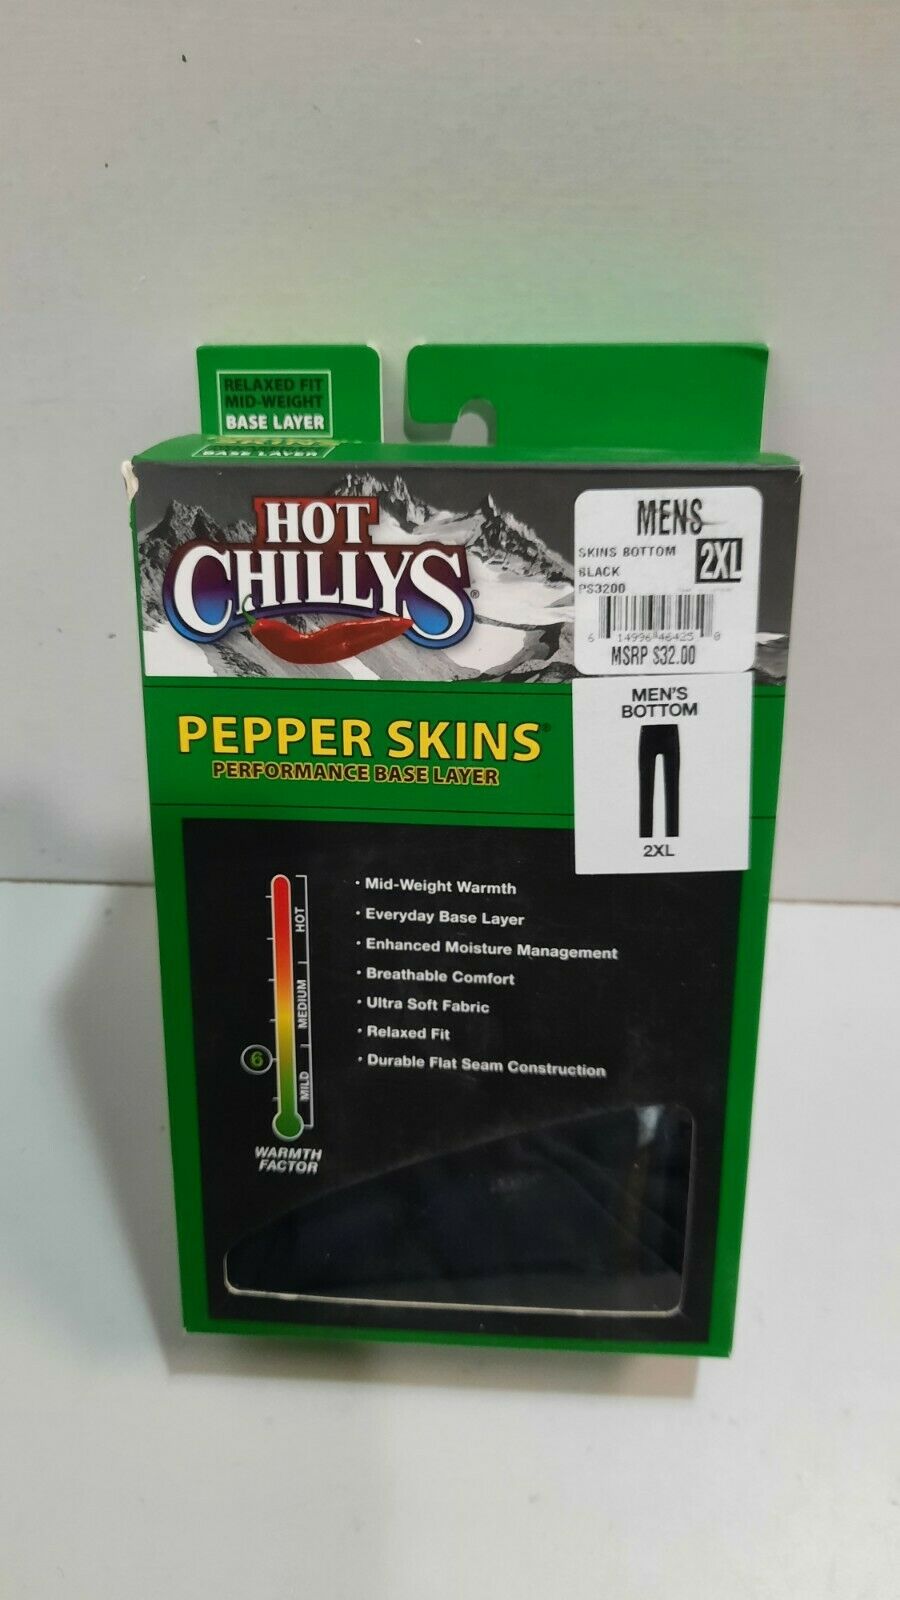 Hot Chillys Pepper Skins Performance Base Layer Size 2XL Winterwear Pants